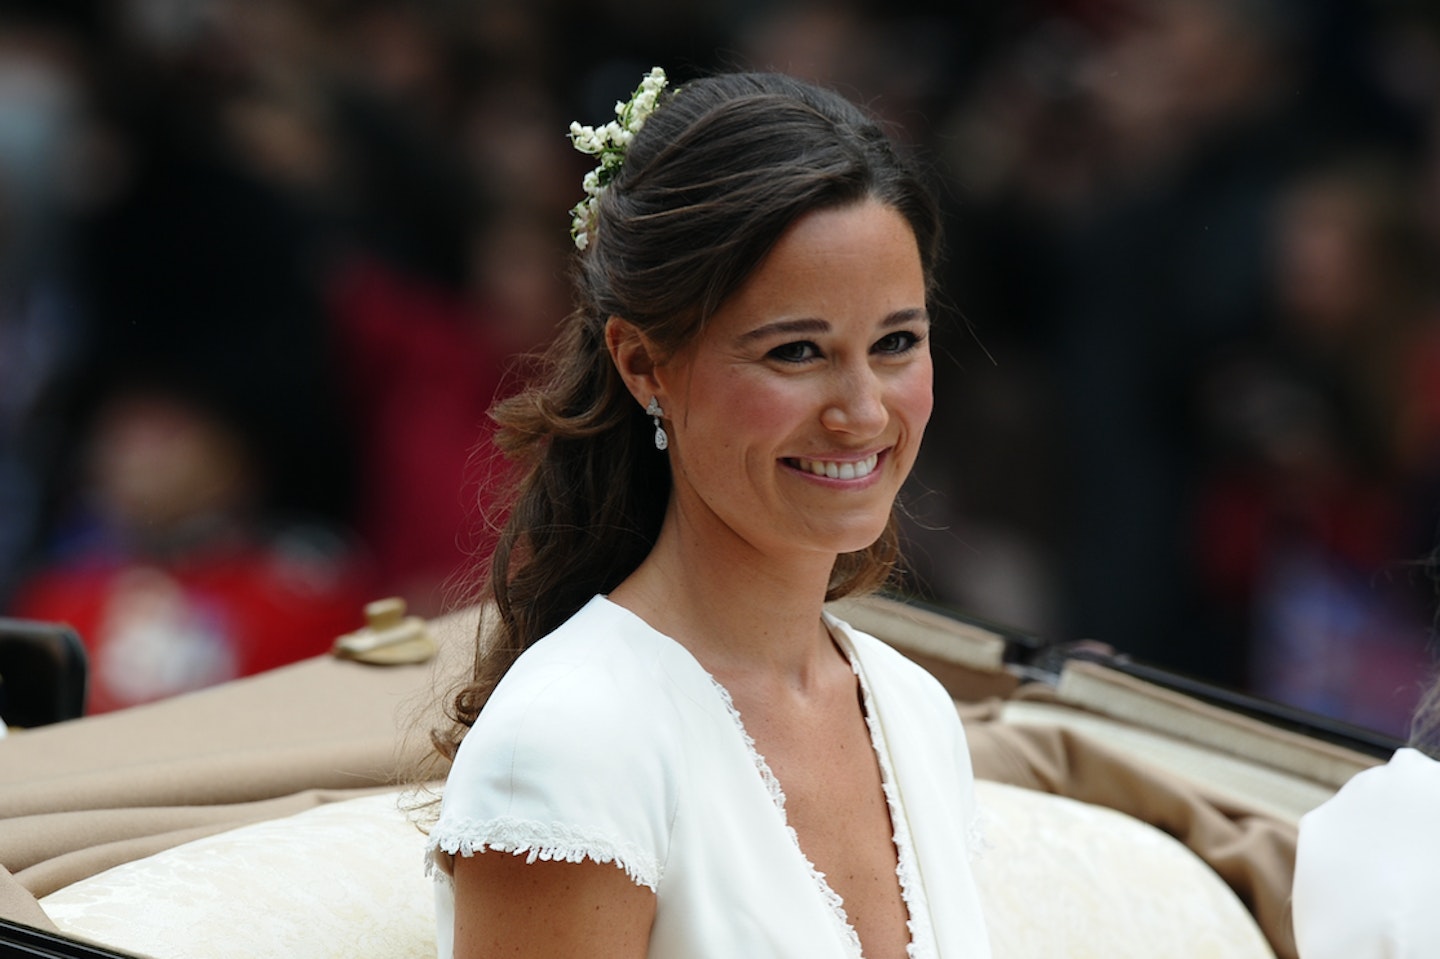 Pippa Middleton and a flower girl at the royal wedding